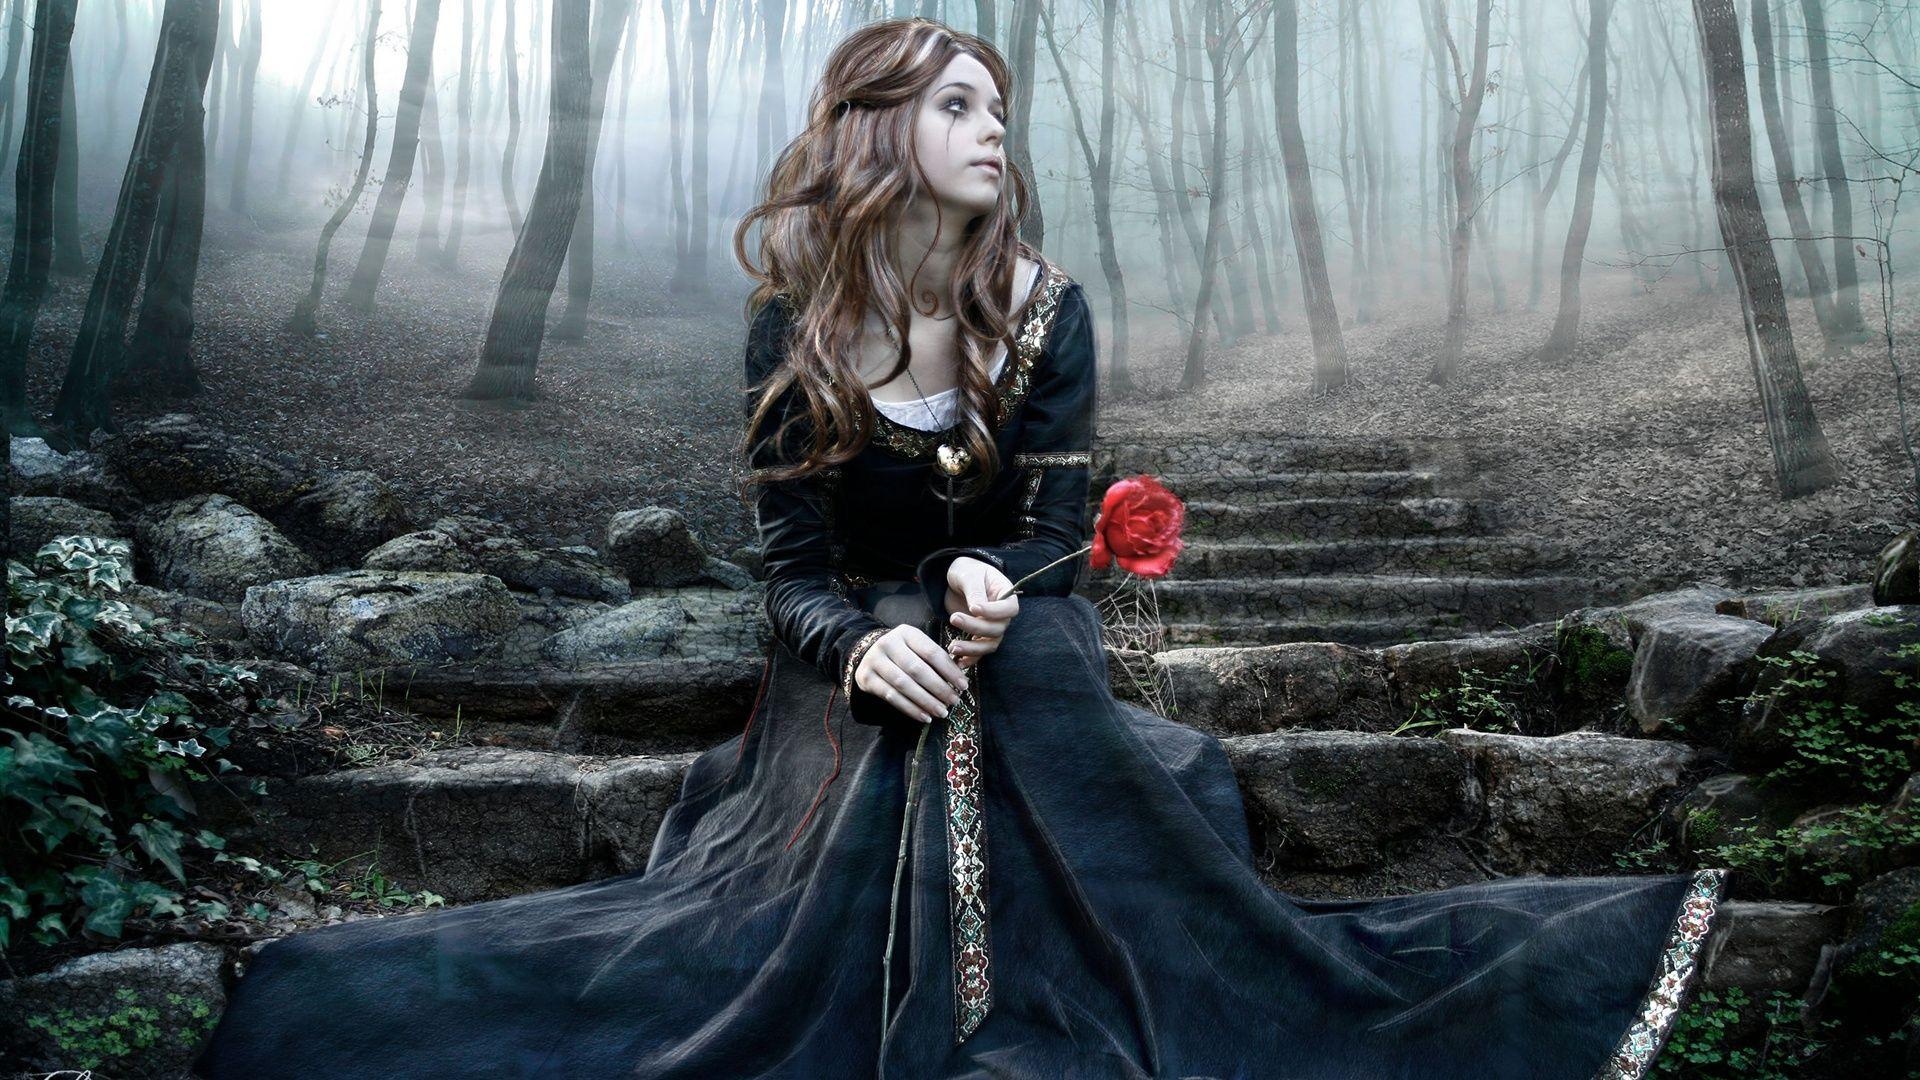 Goth Girl: Sad gothic princess, Fantasy style, Fantasy forest, Magic world, Middle Ages. 1920x1080 Full HD Wallpaper.